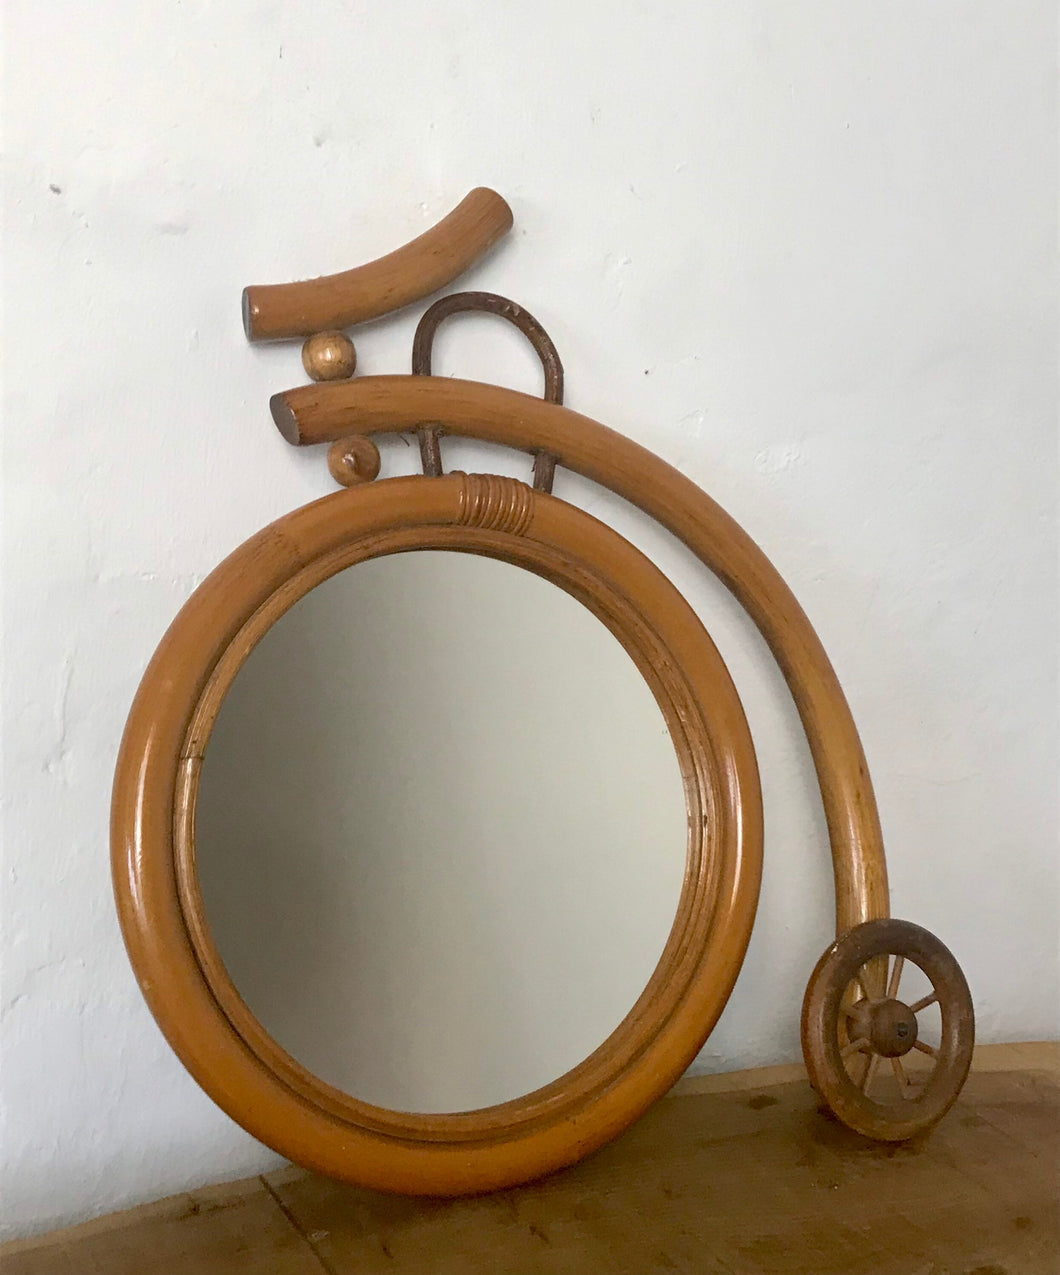 Unique vintage penny farthing bamboo wall mirror, collectibles piece